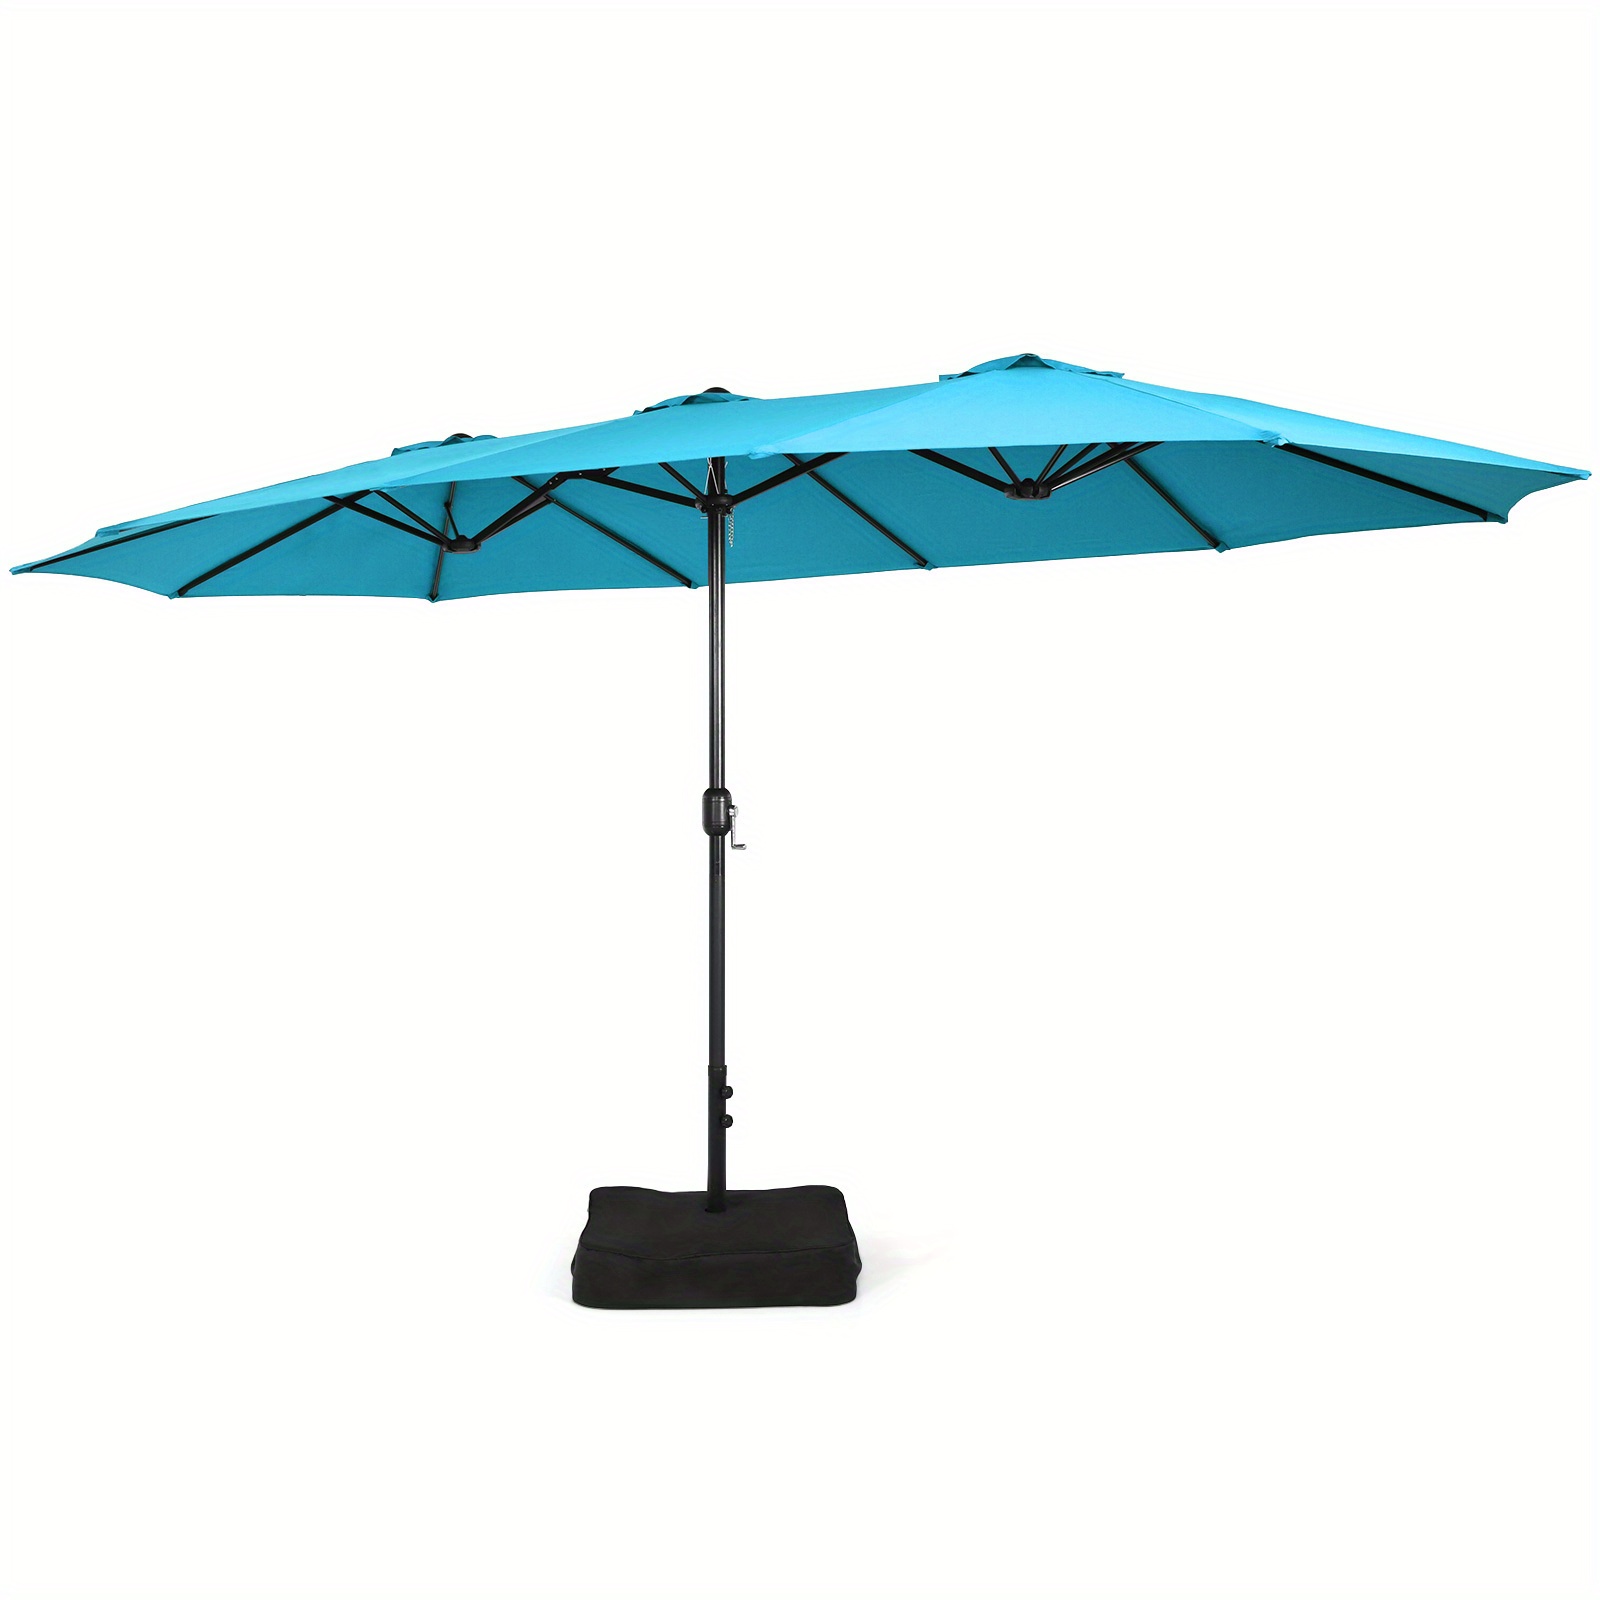 

Safstar 15ft Double-sided Twin Patio Umbrella Outdoor Market W/ Crank & Base Turquoise